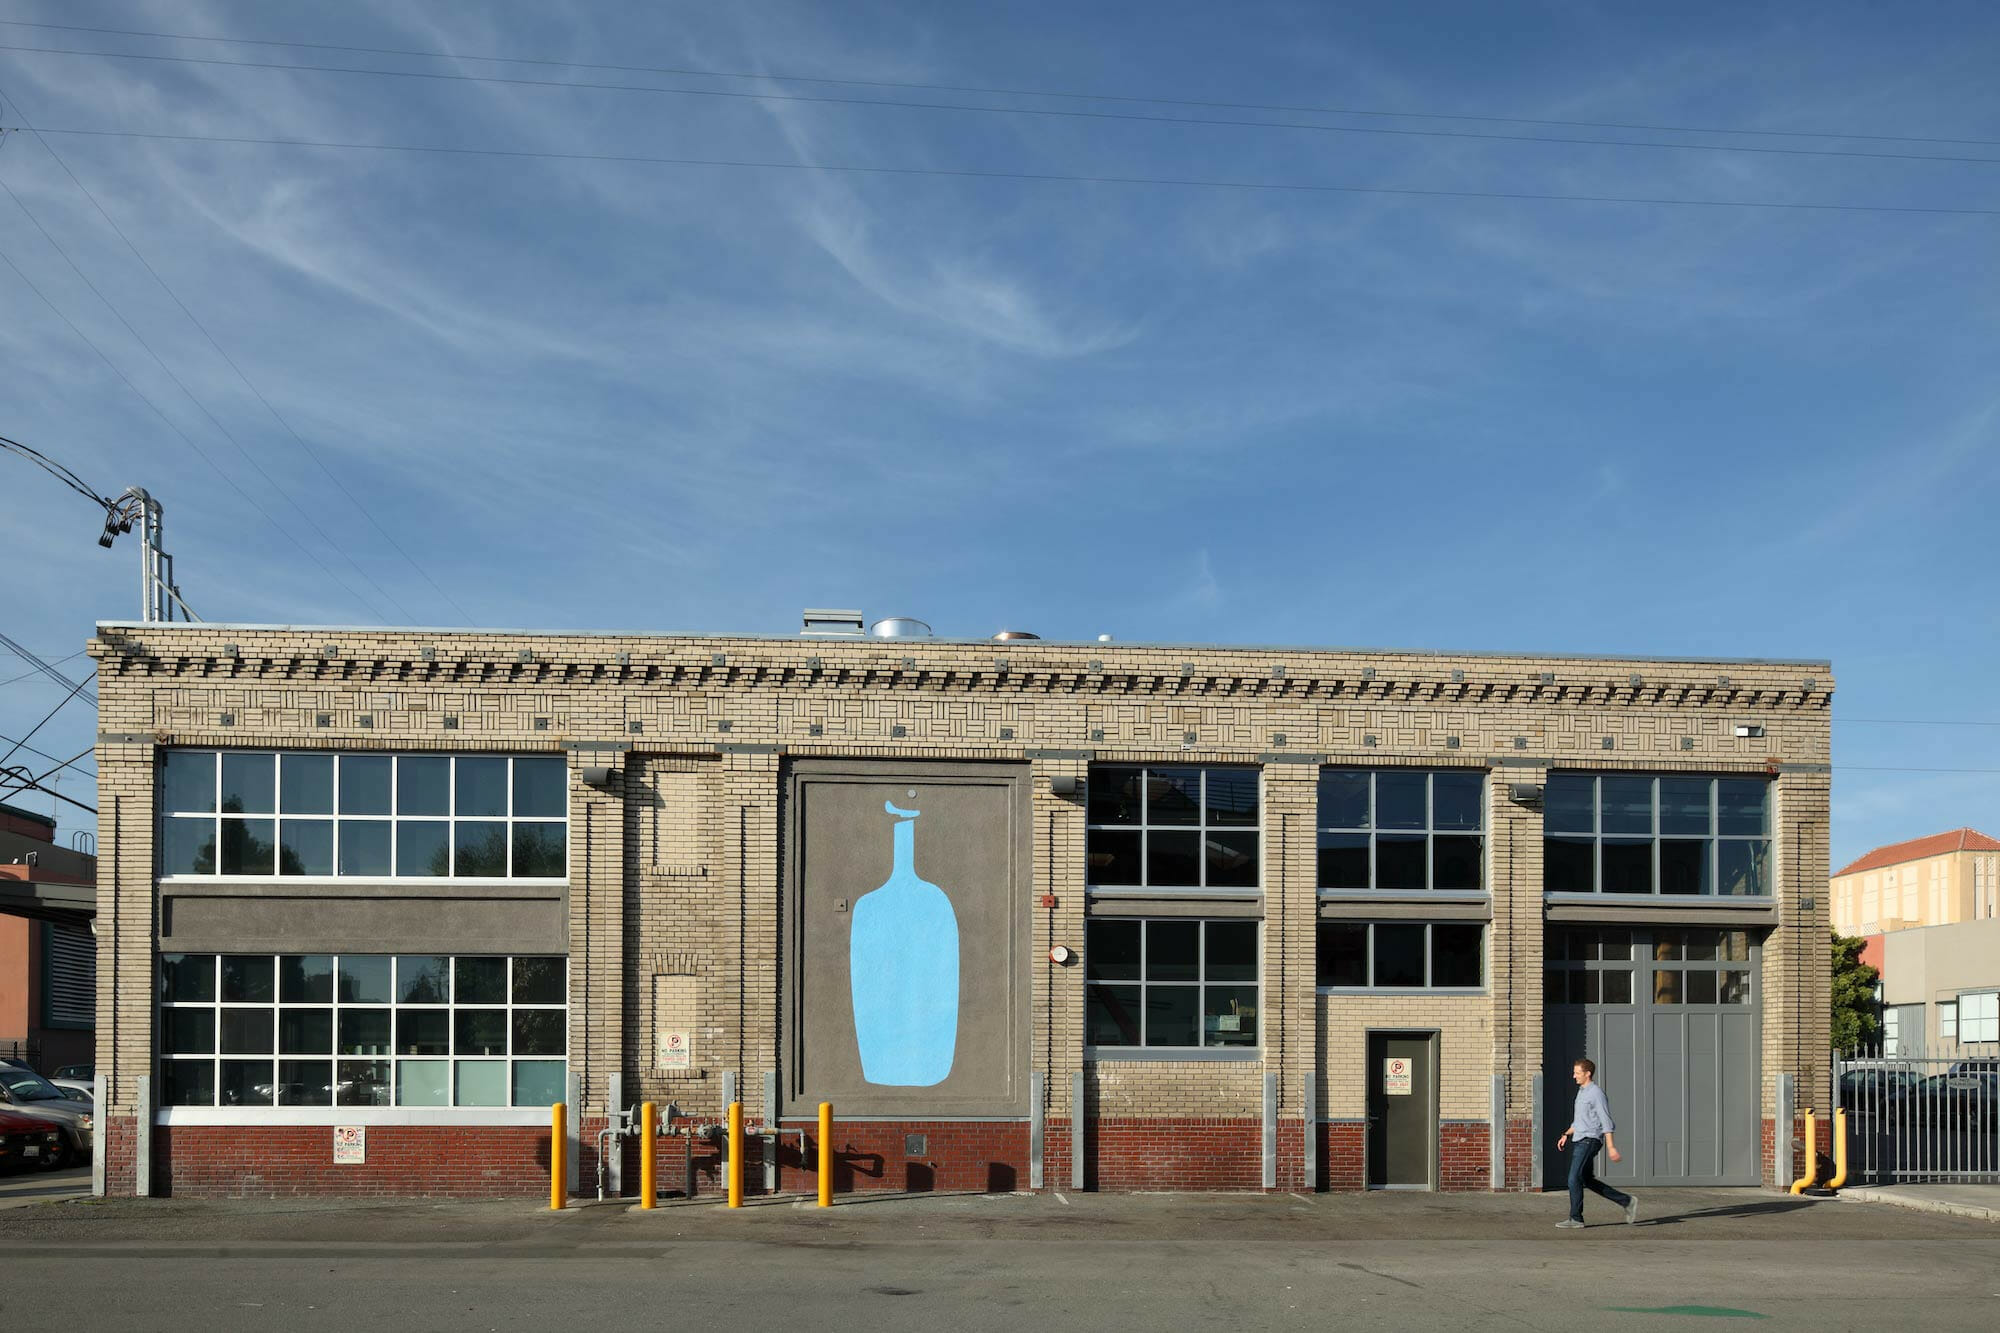 About Blue Bottle Coffee